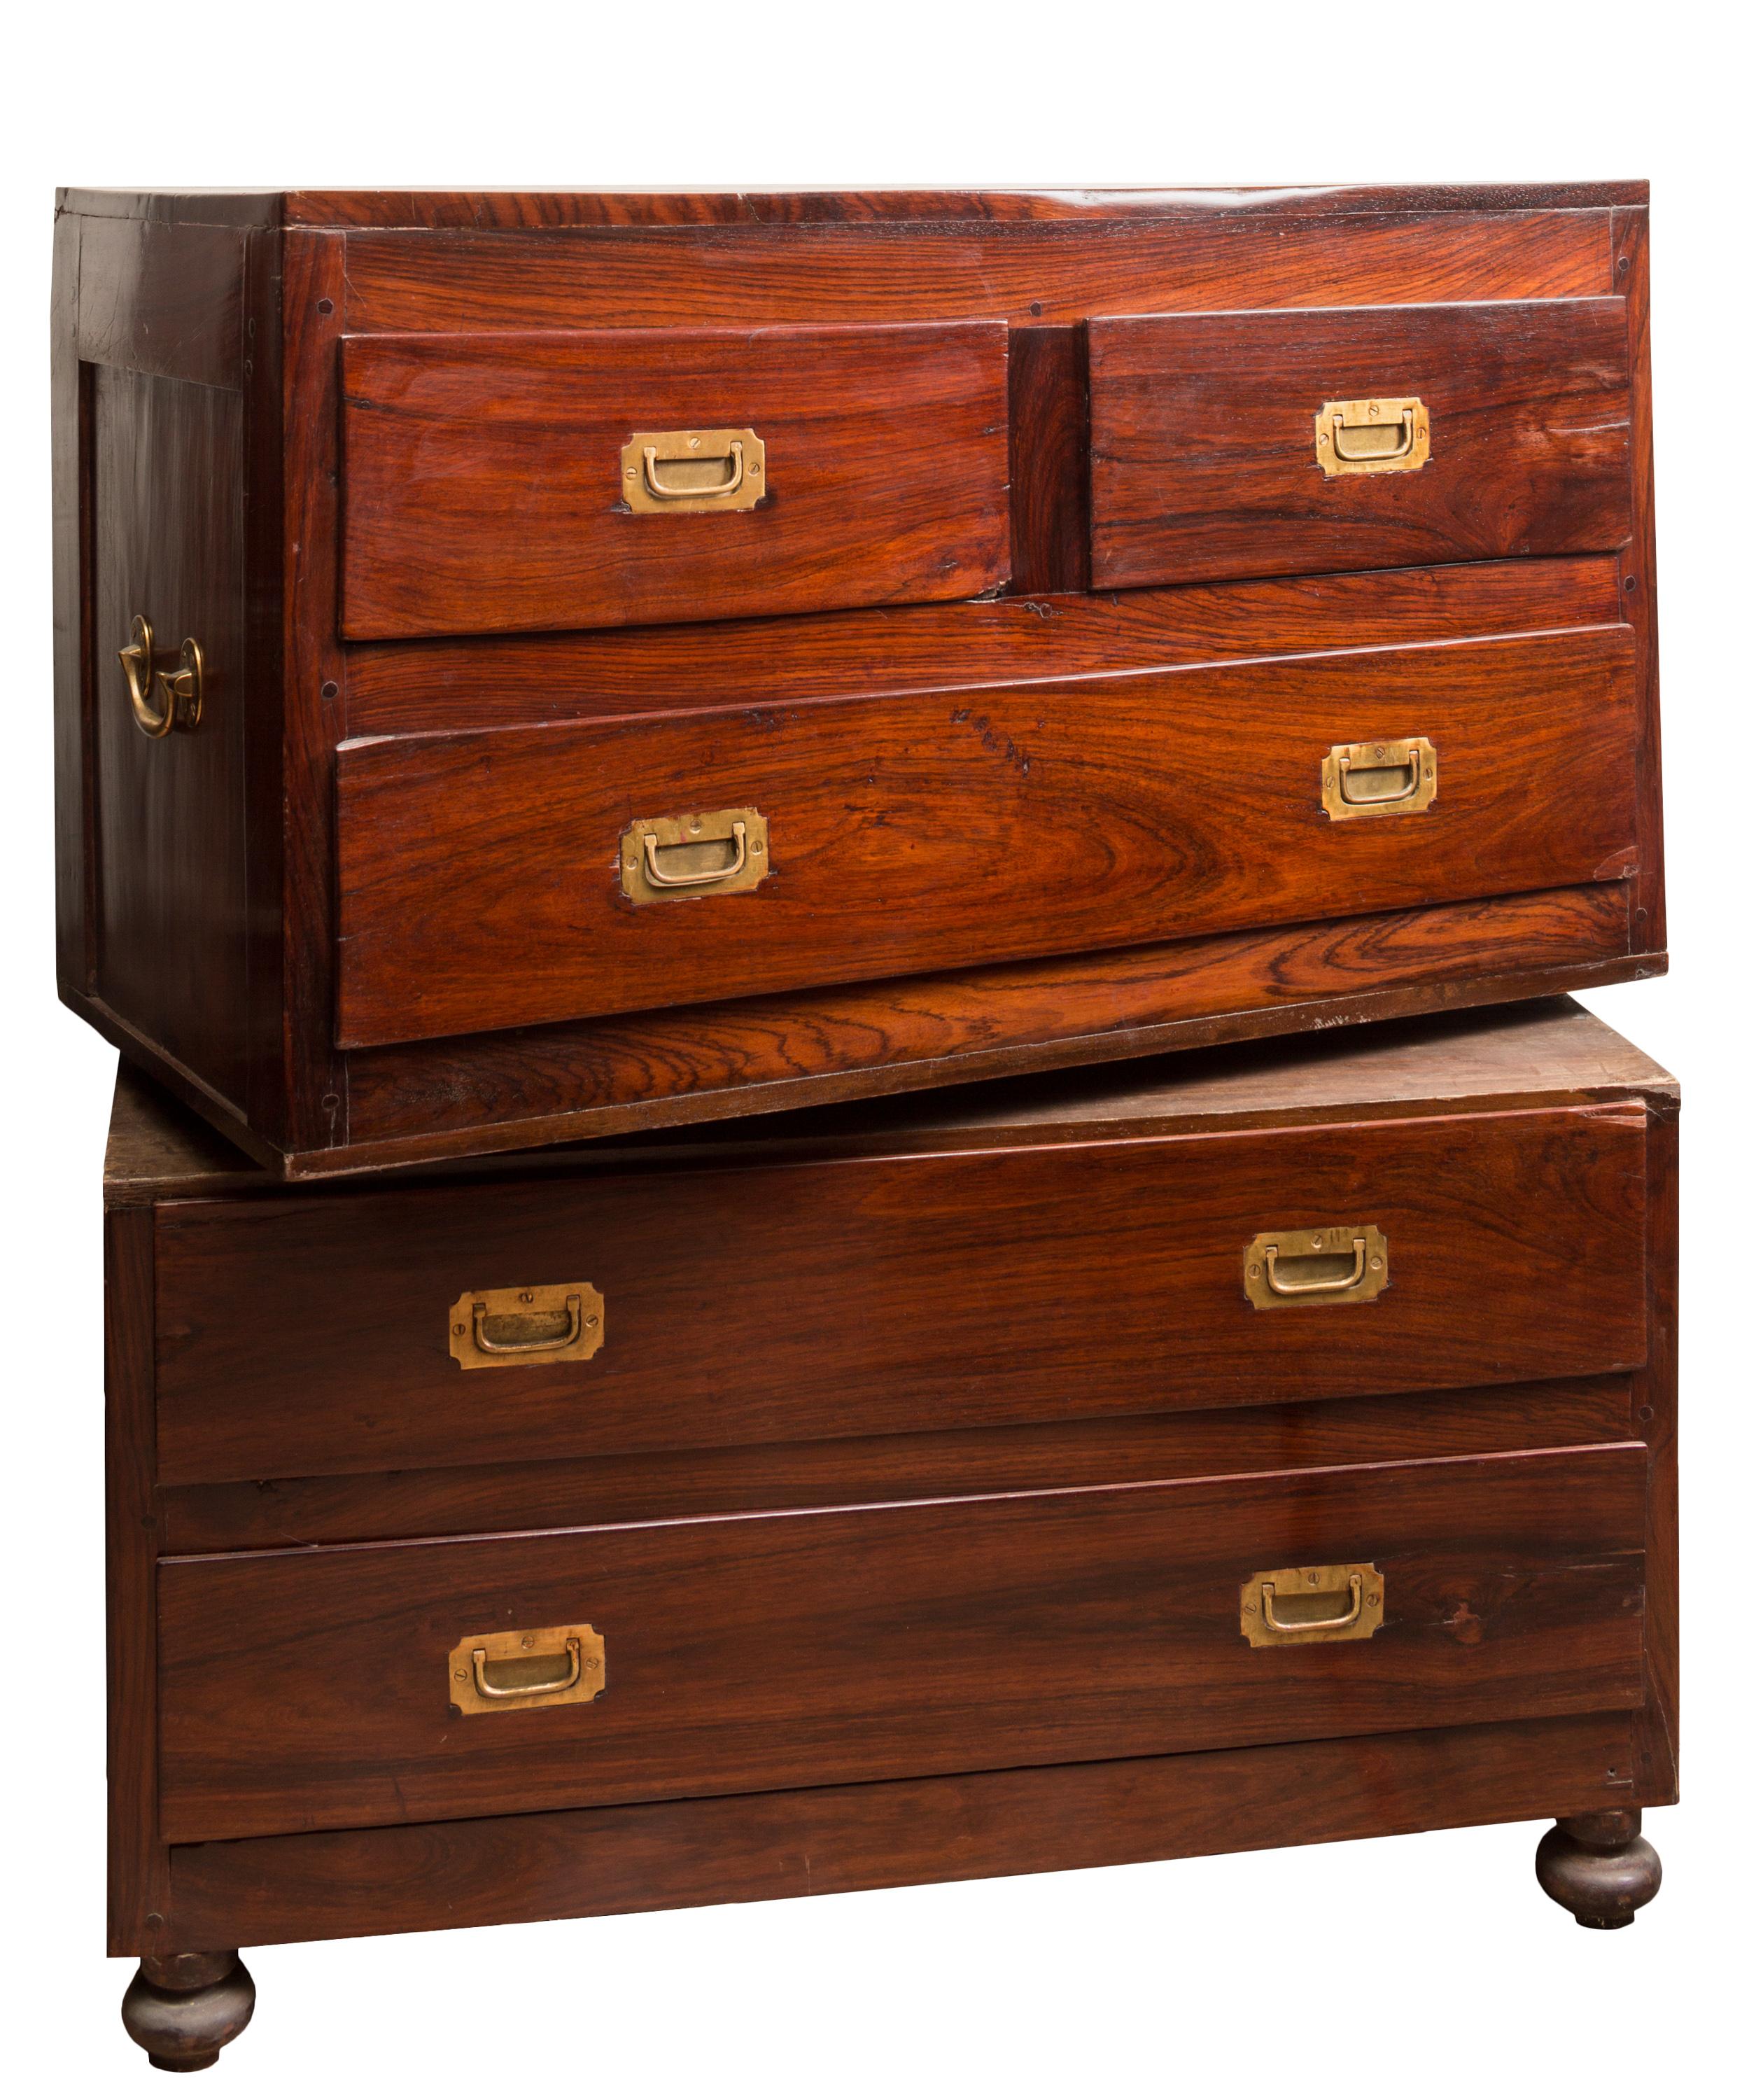 A 19th century British military Campaign two-piece chest of drawers, with original brass hardware. This particular style of furniture was originally developed to carry the belongings of officers during long military campaigns. It was built of